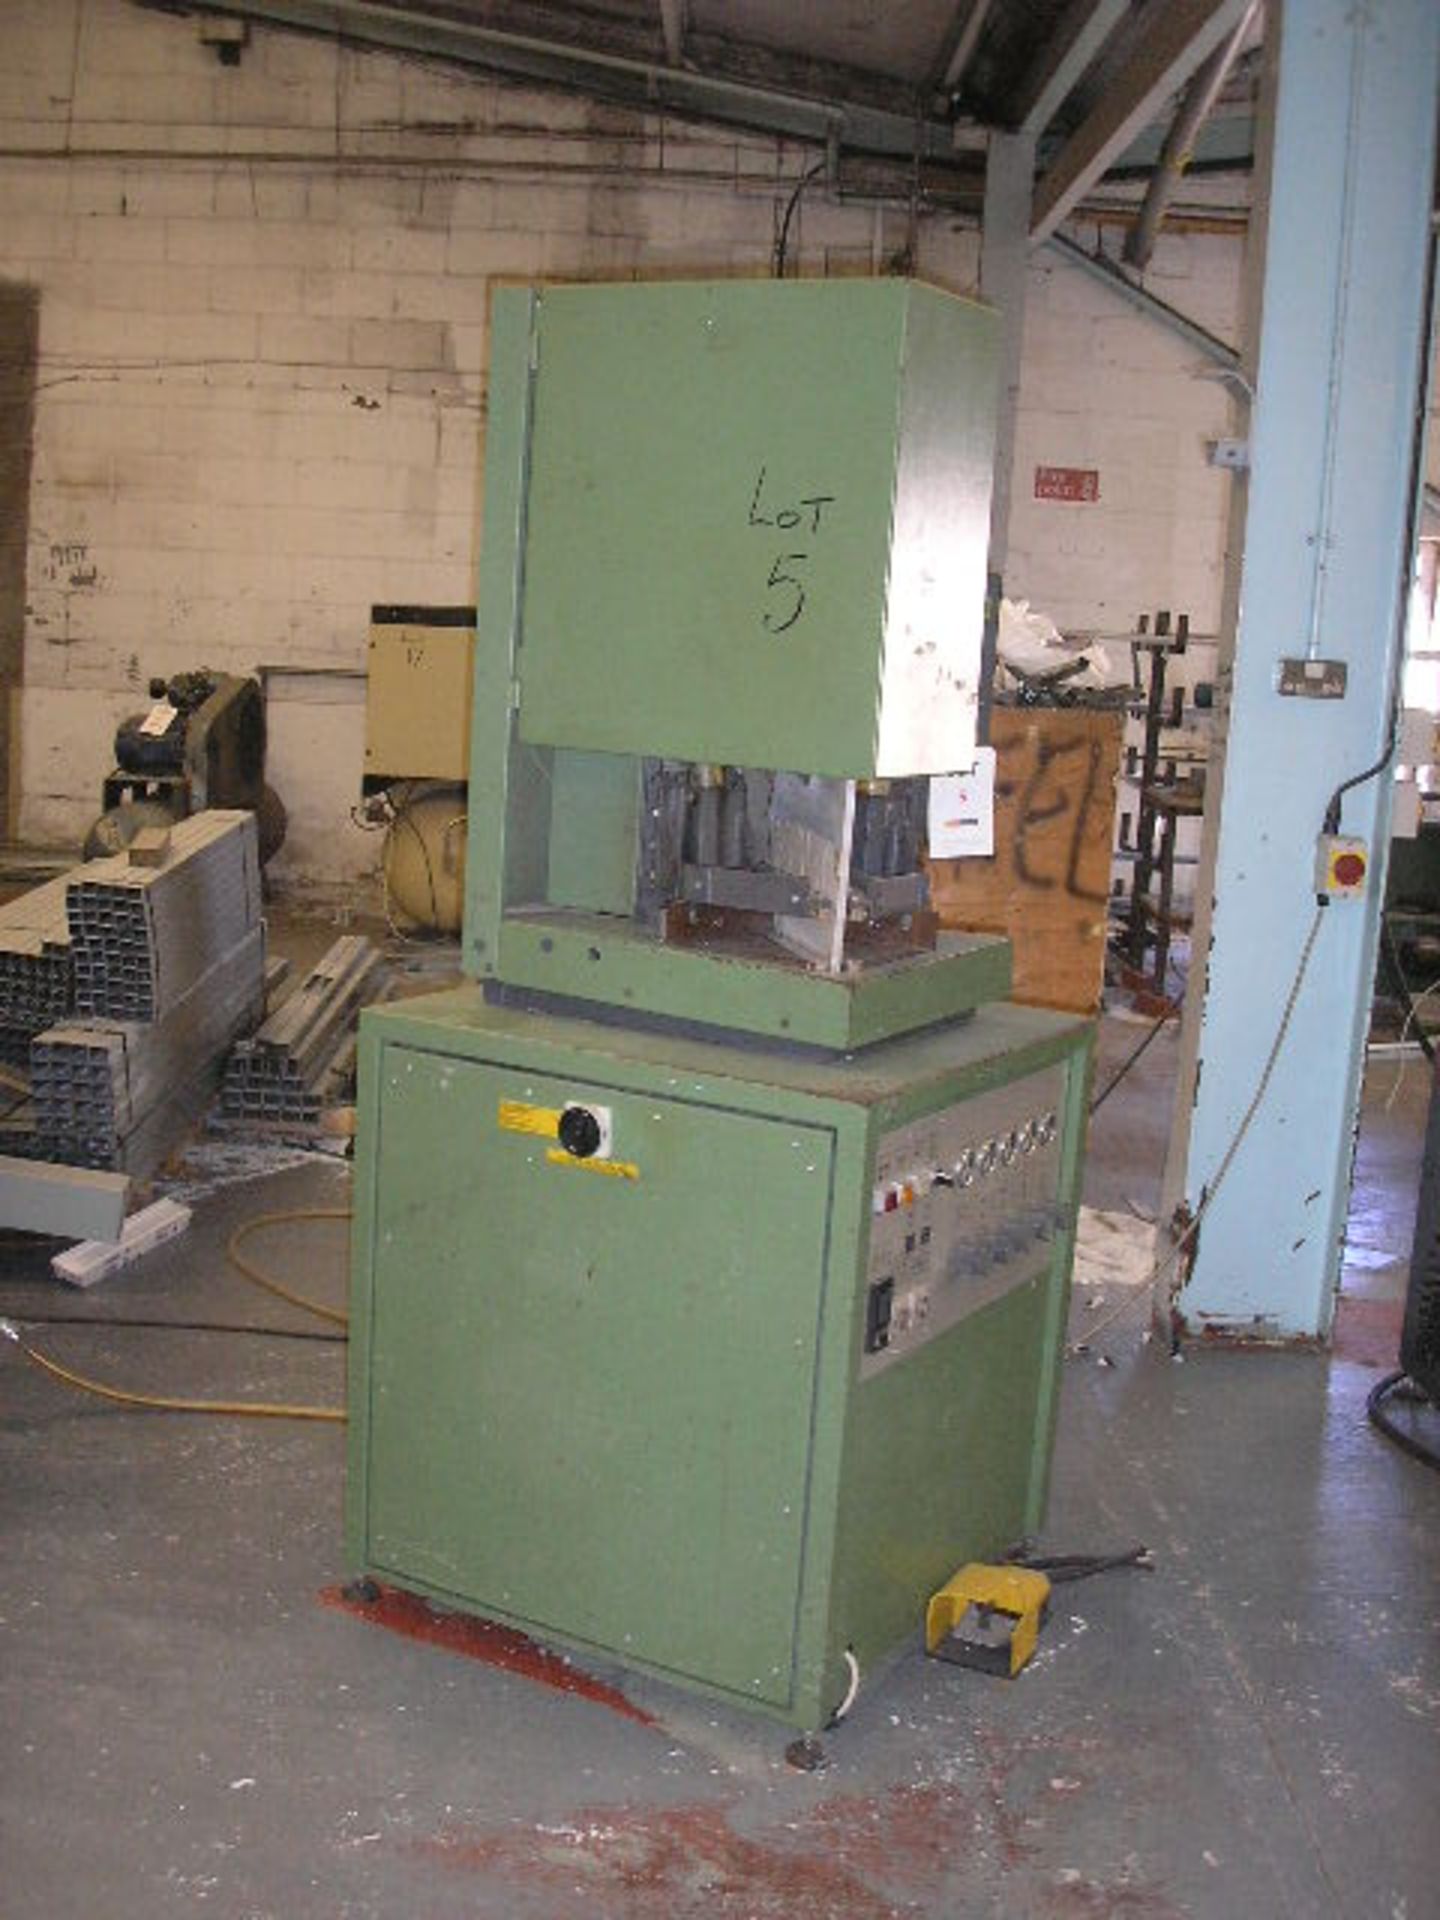 Someco Unival 510NLV single head welder, S/No. 56490602, Date 2002 - Image 3 of 3